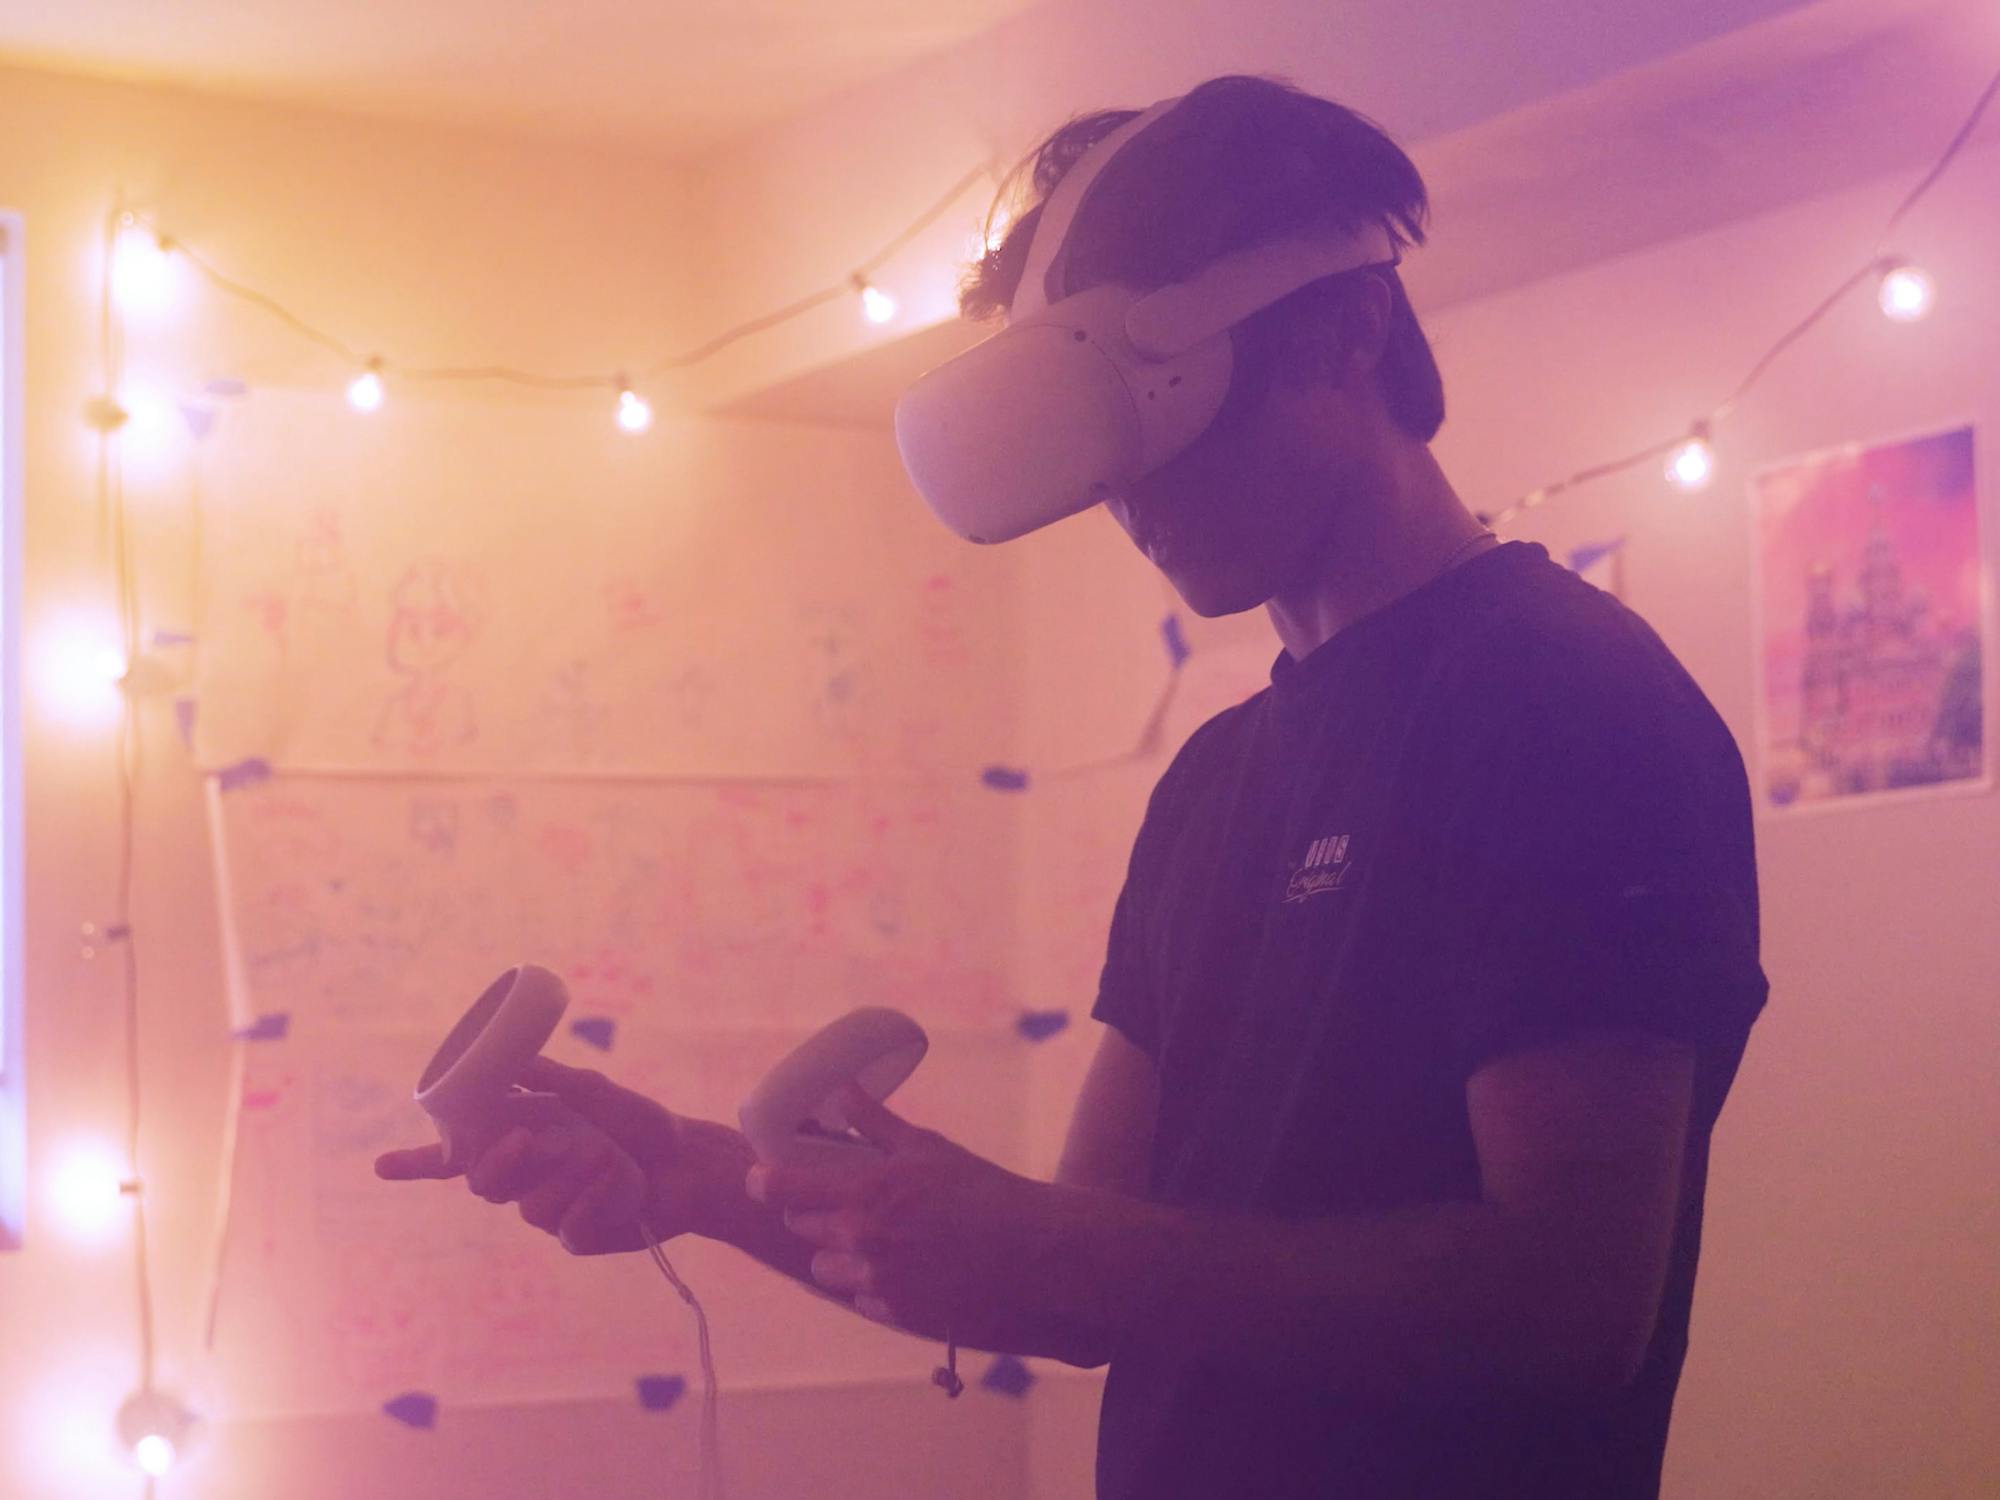 Male in VR headset in room with pink lights
